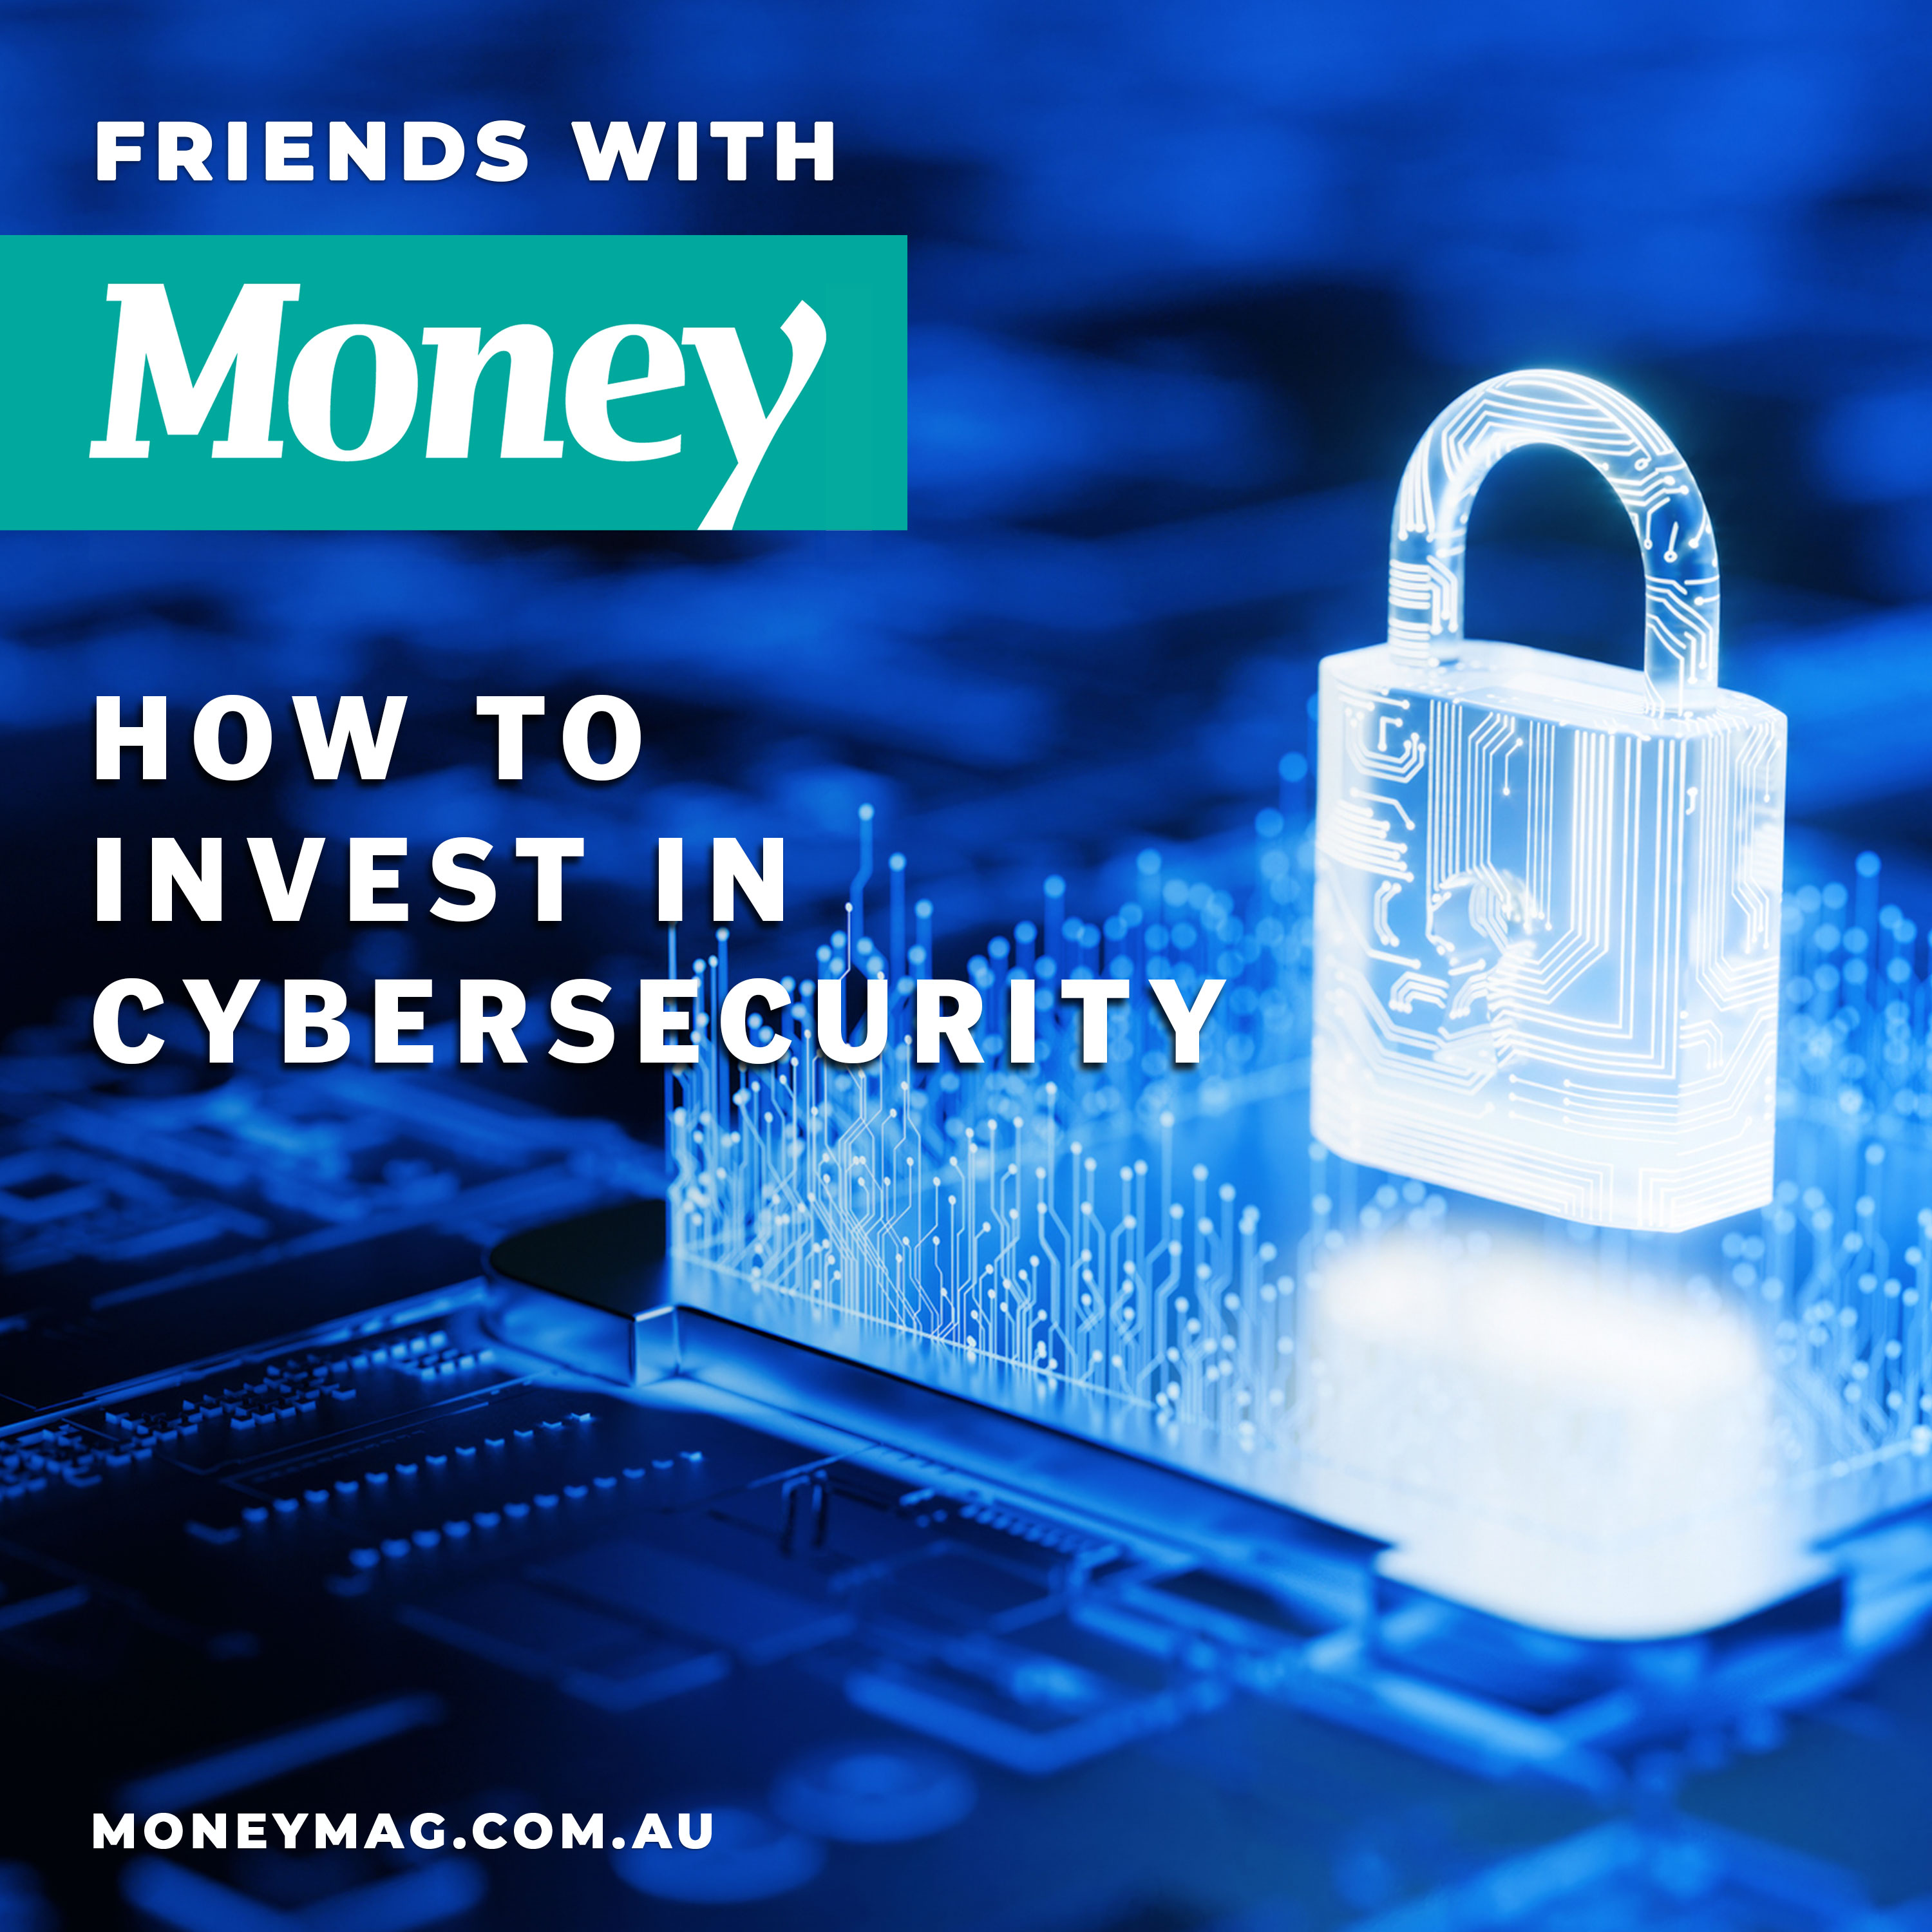 How to invest in cybersecurity